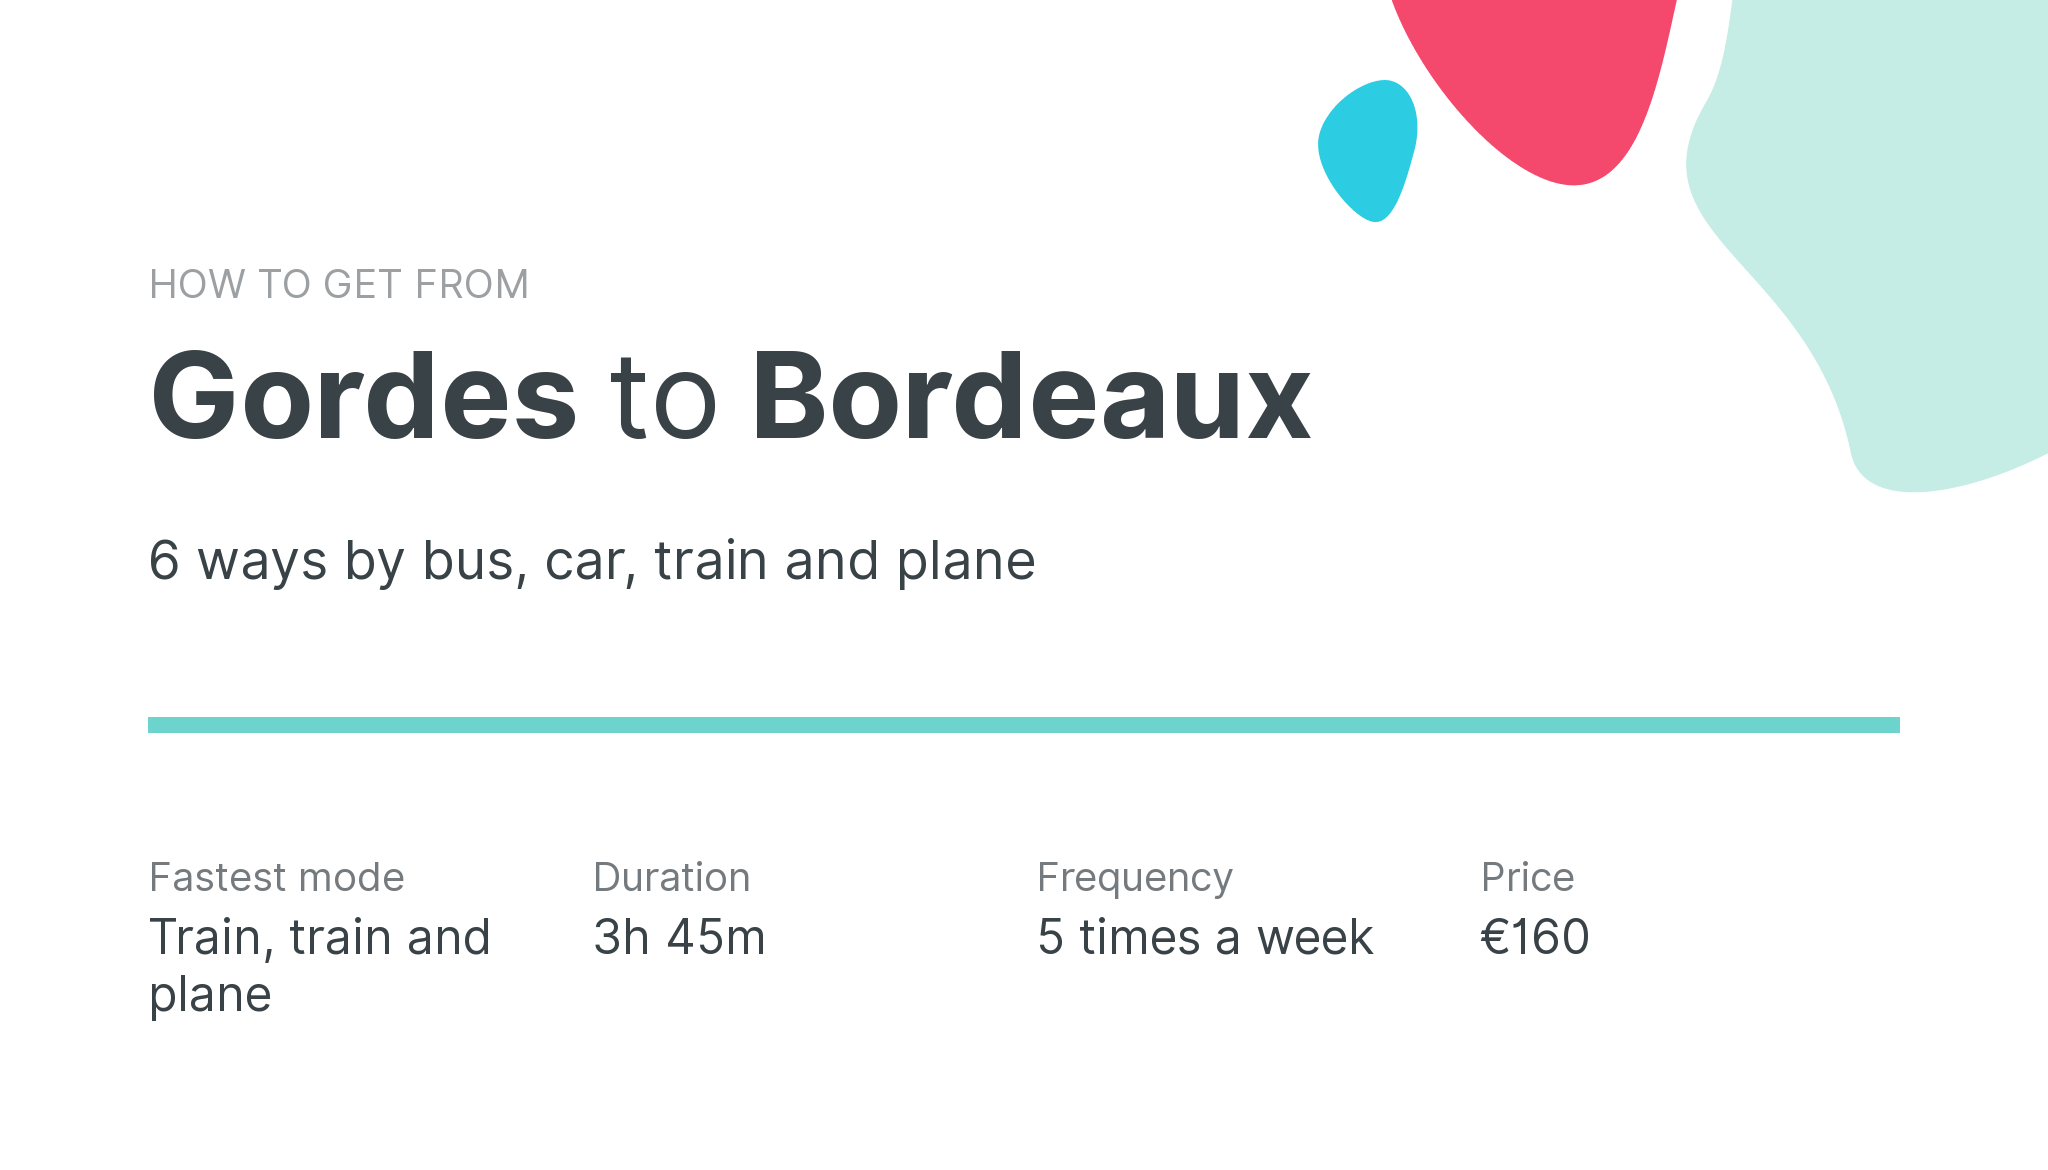 How do I get from Gordes to Bordeaux